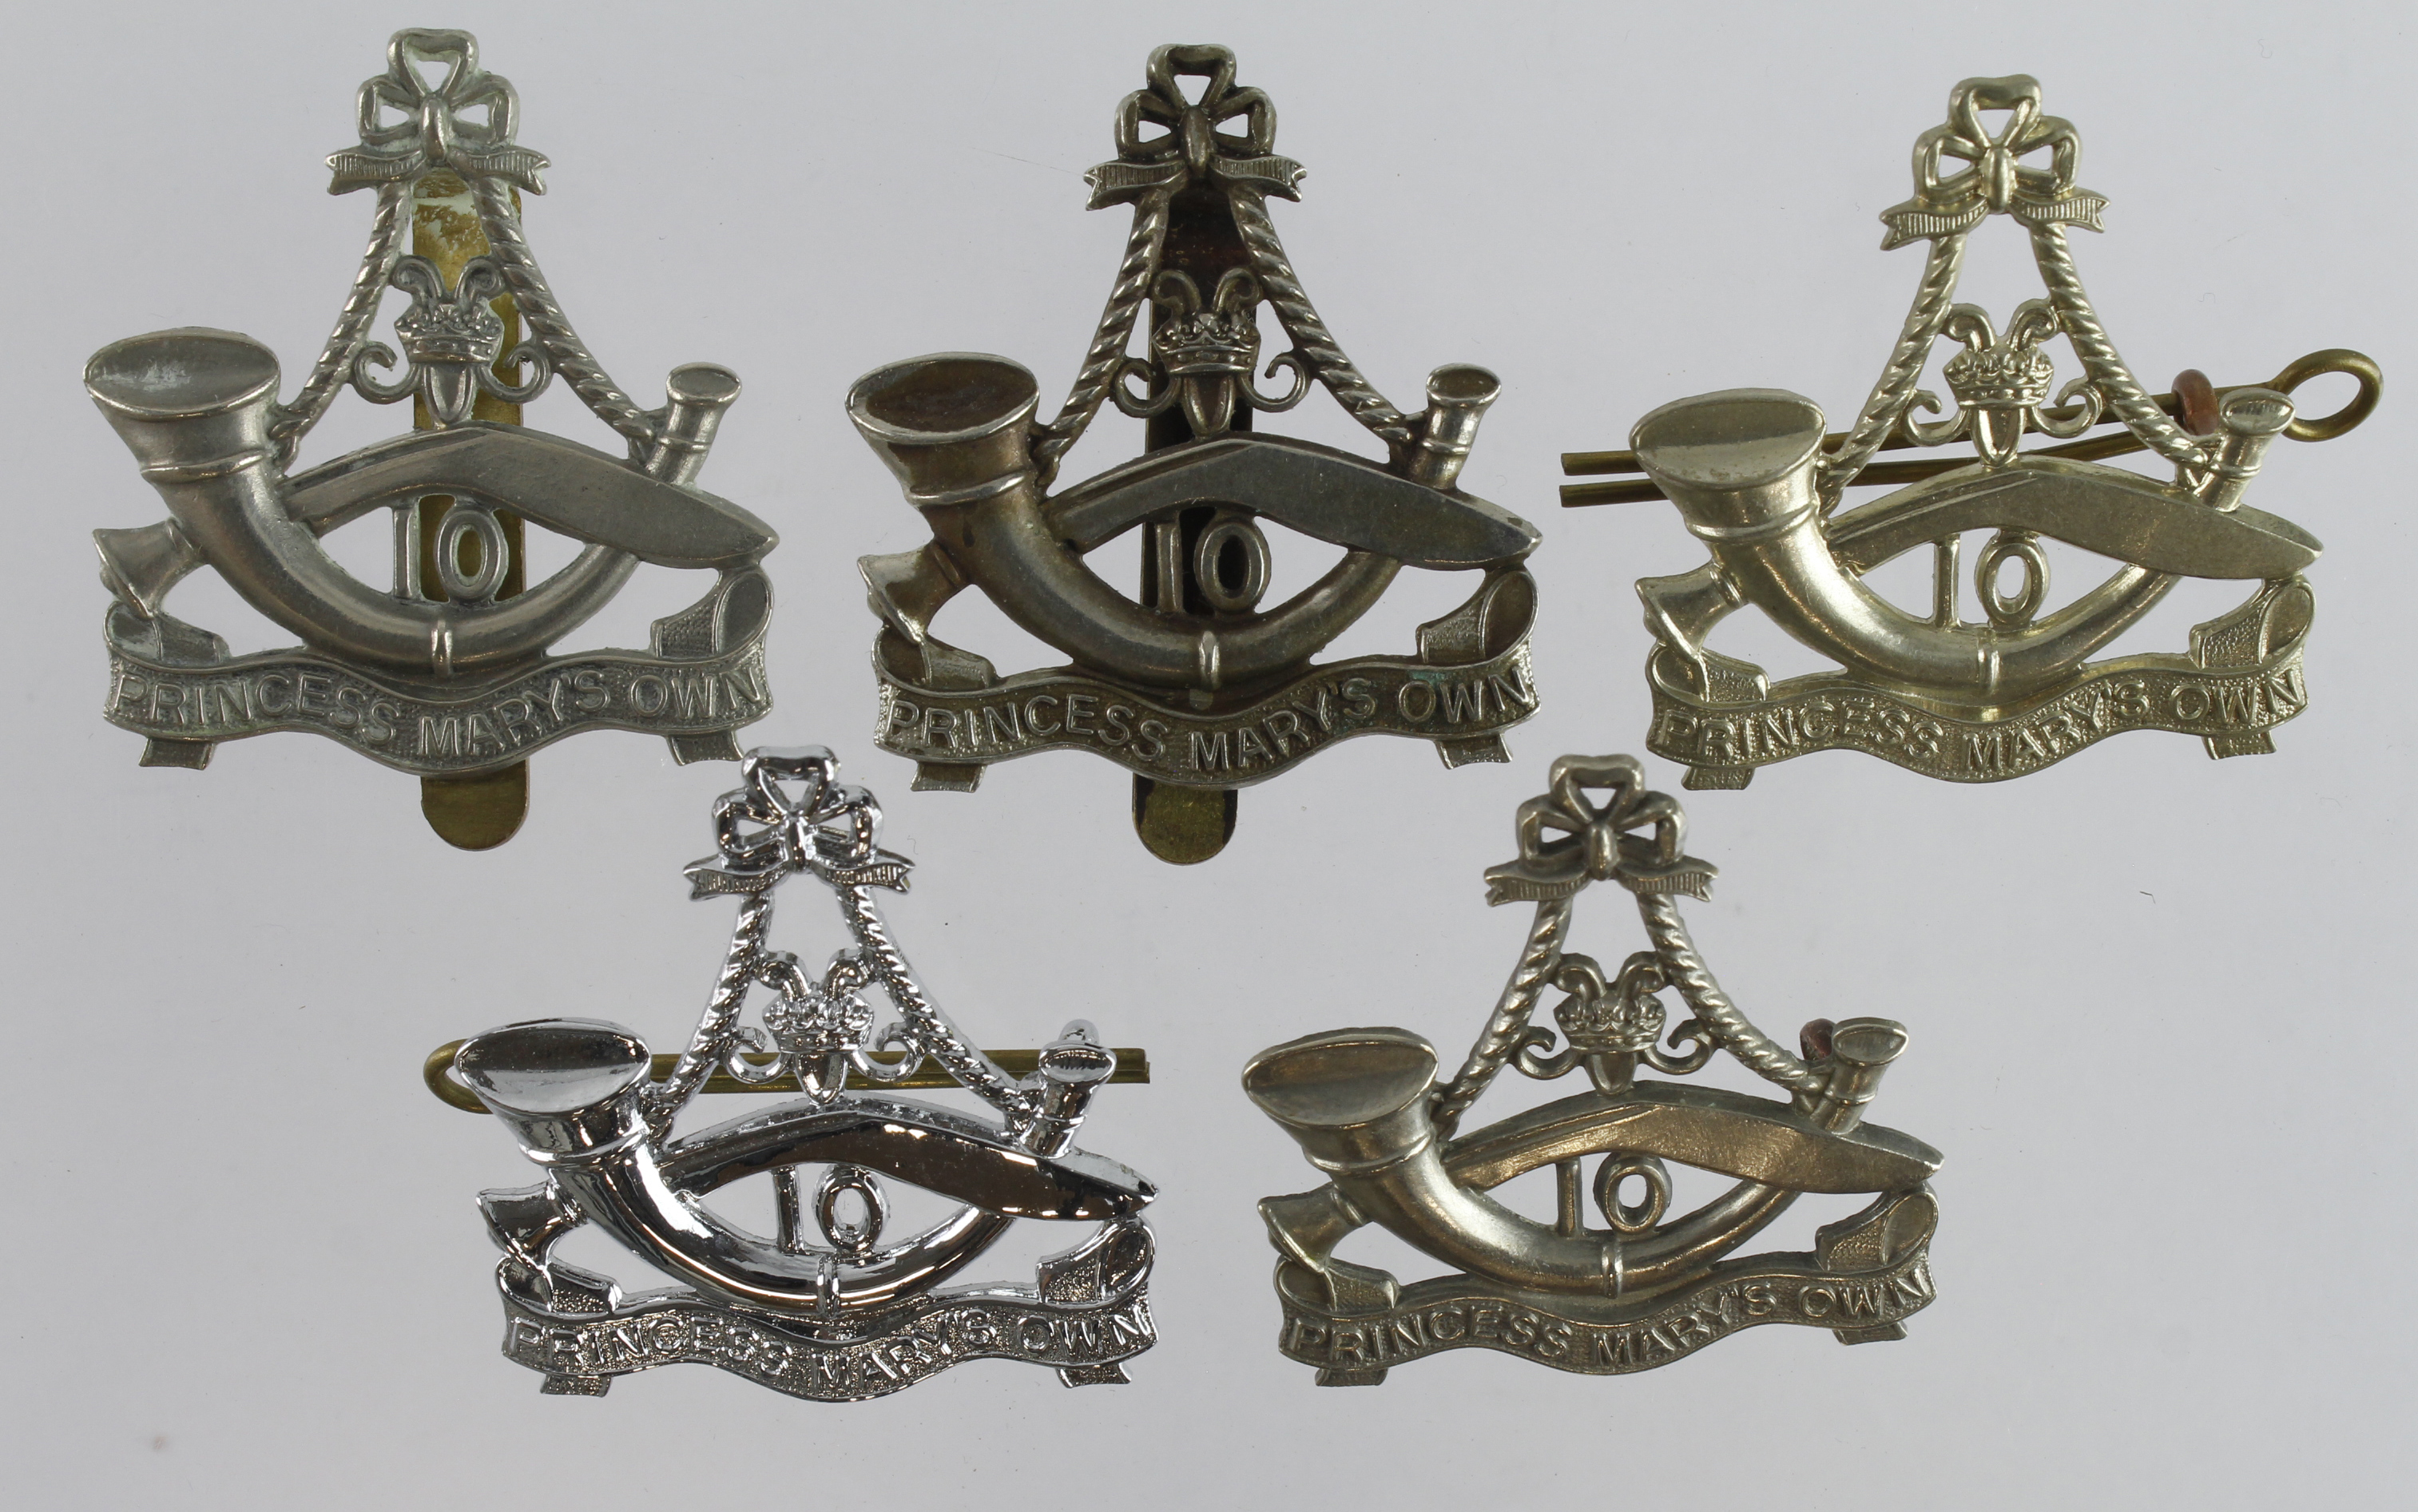 Badges five of including Princess Marys own 10th Gurkha Rifles all with sliders and lugs.